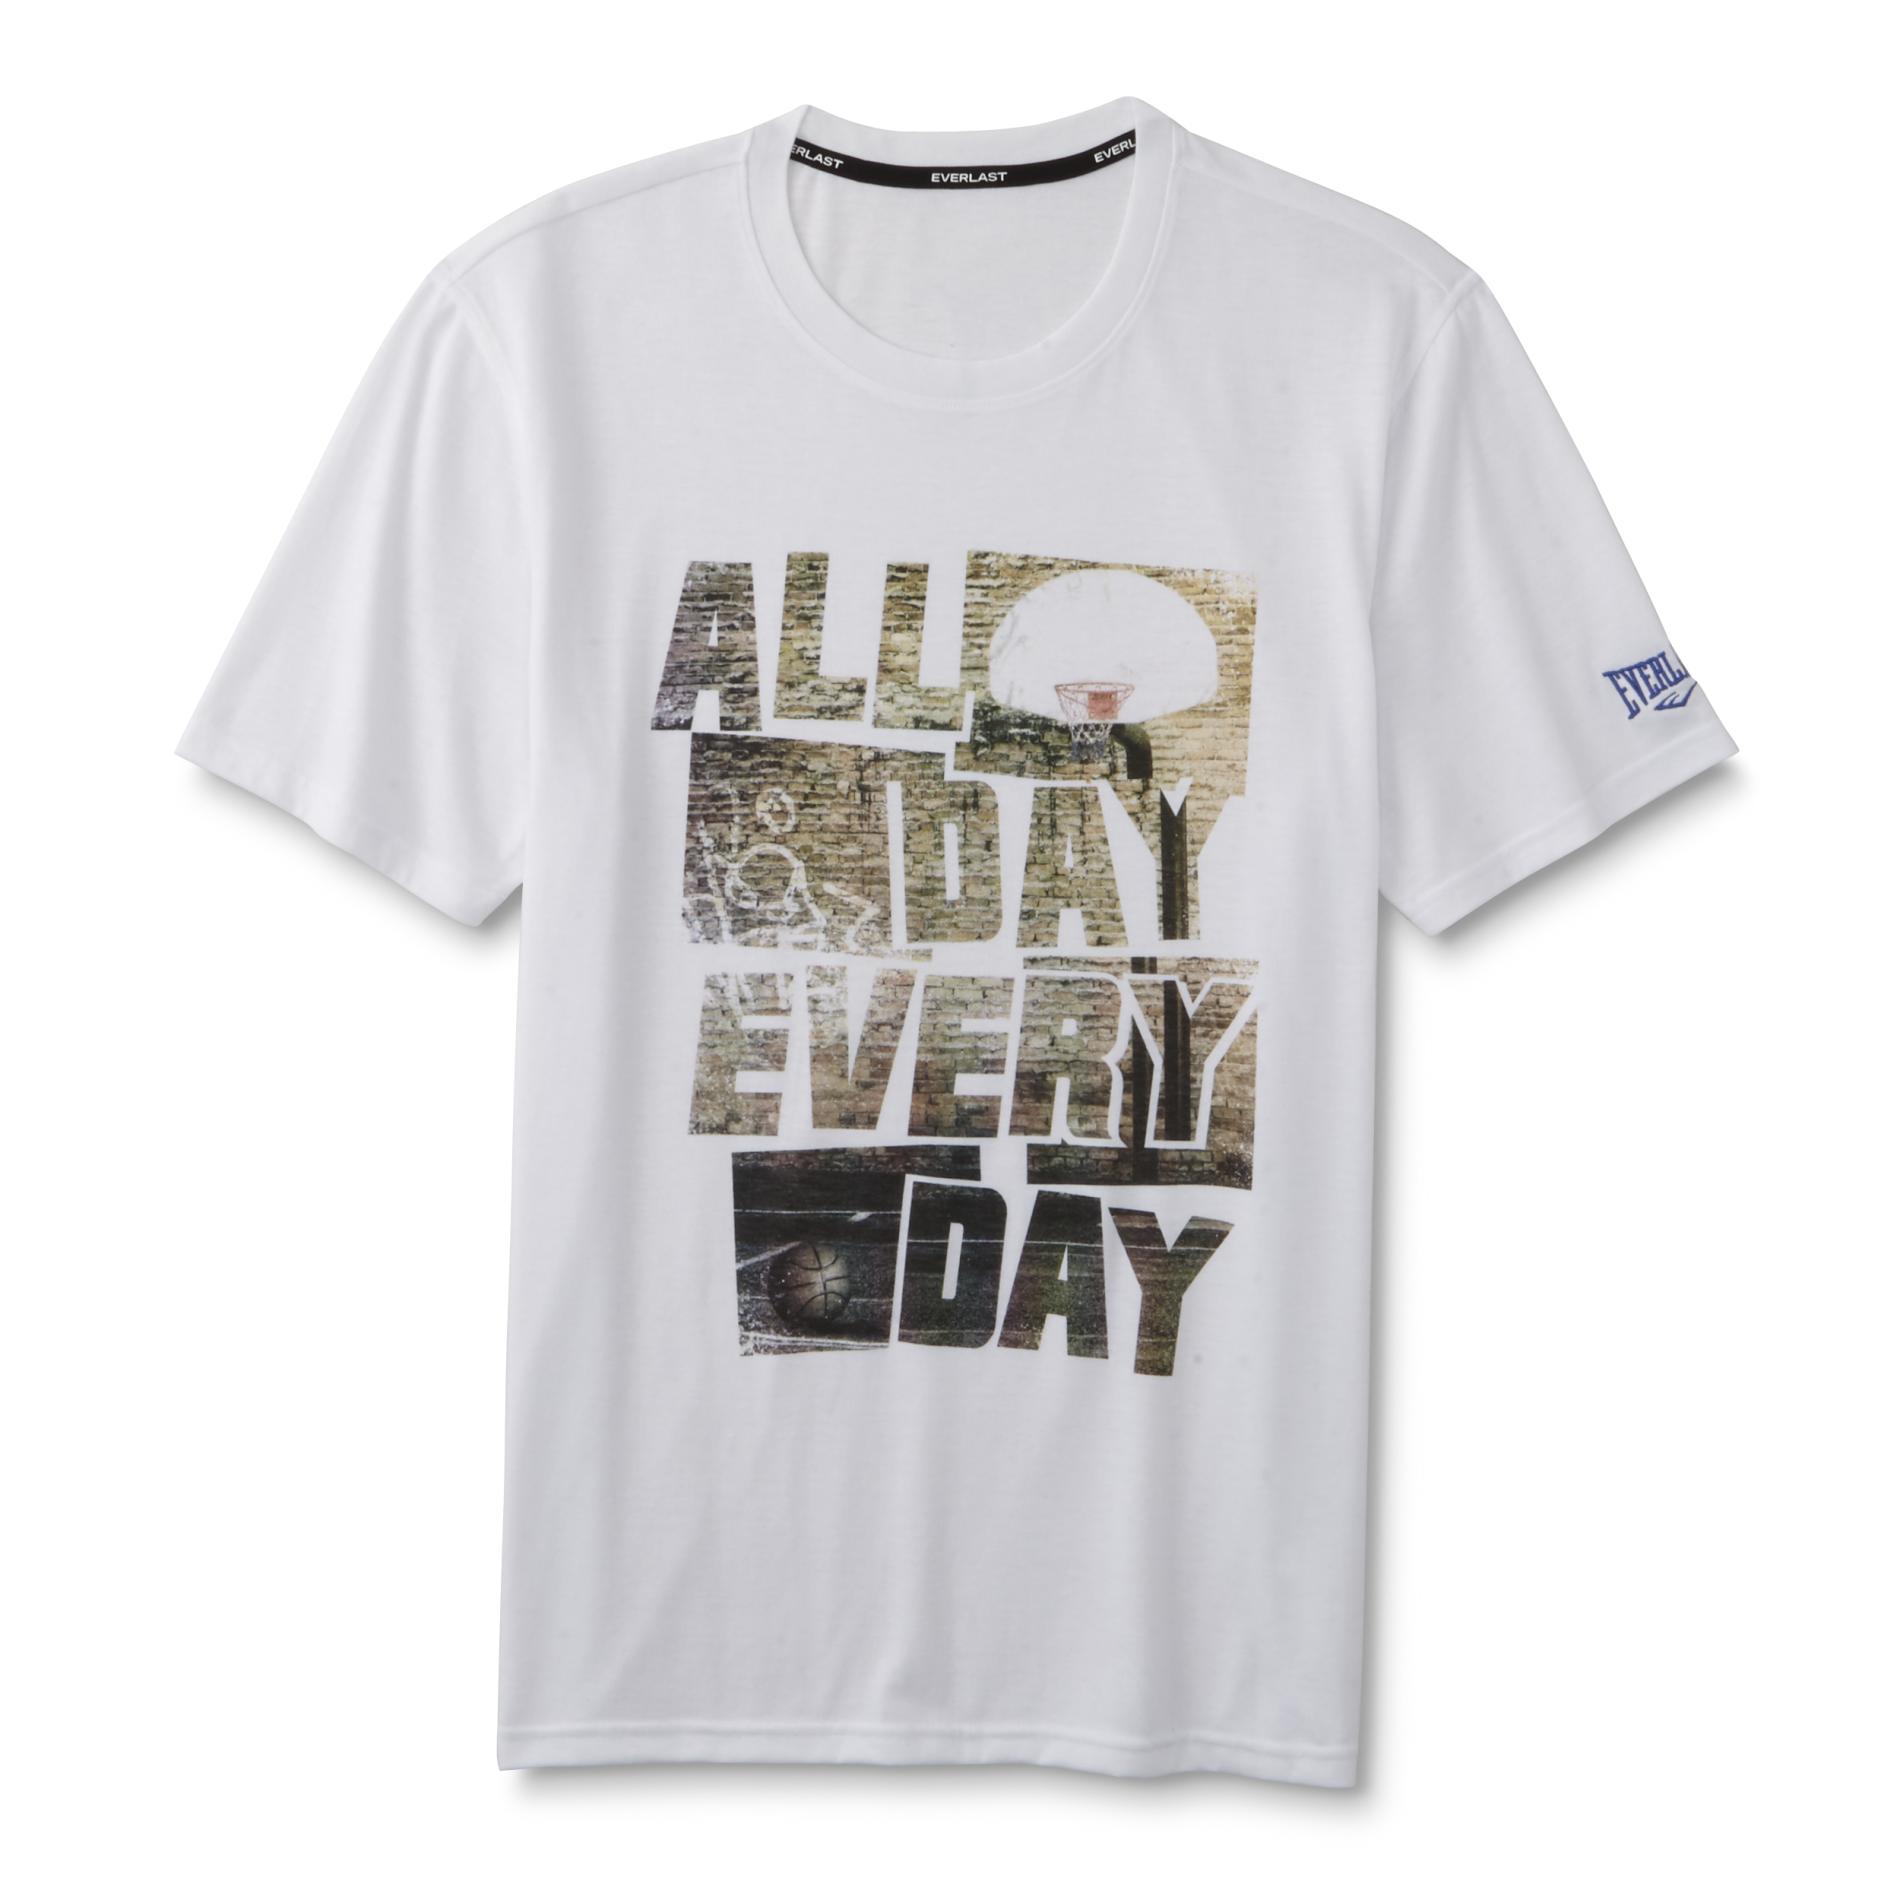 Everlast&reg; Men's Graphic T-Shirt - All Day Every Day